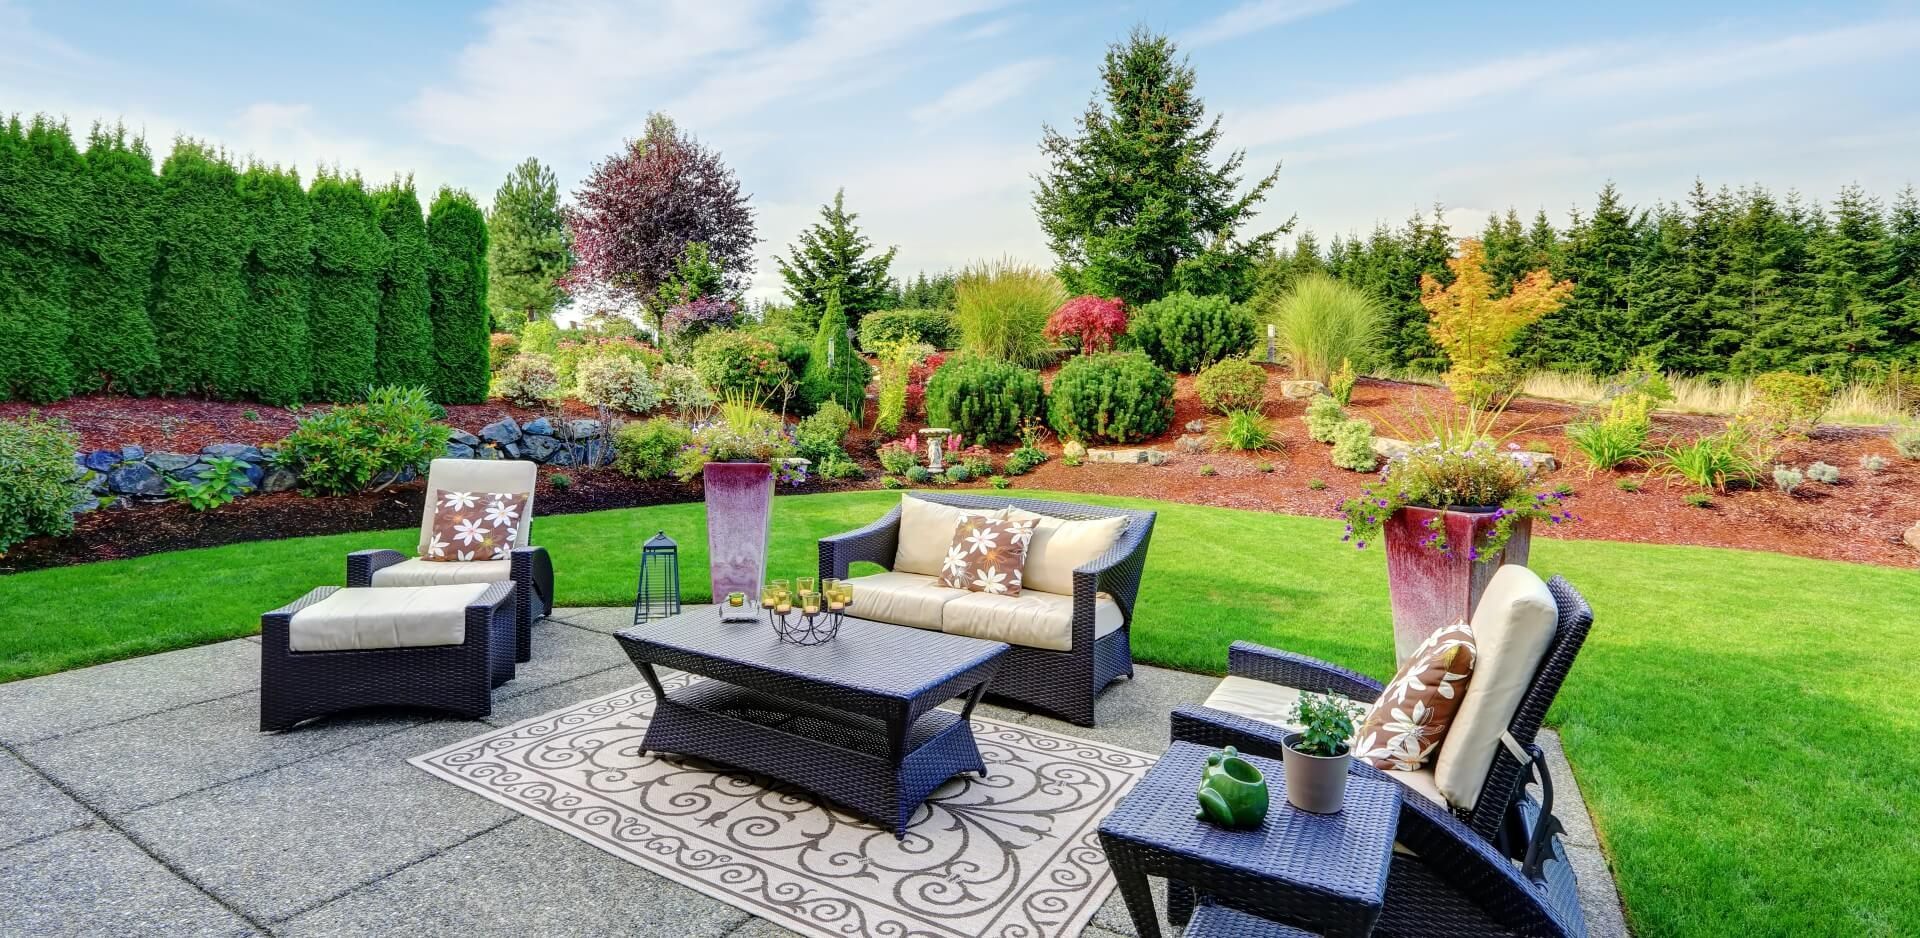 Creating a warm and welcoming outdoor living space for your home